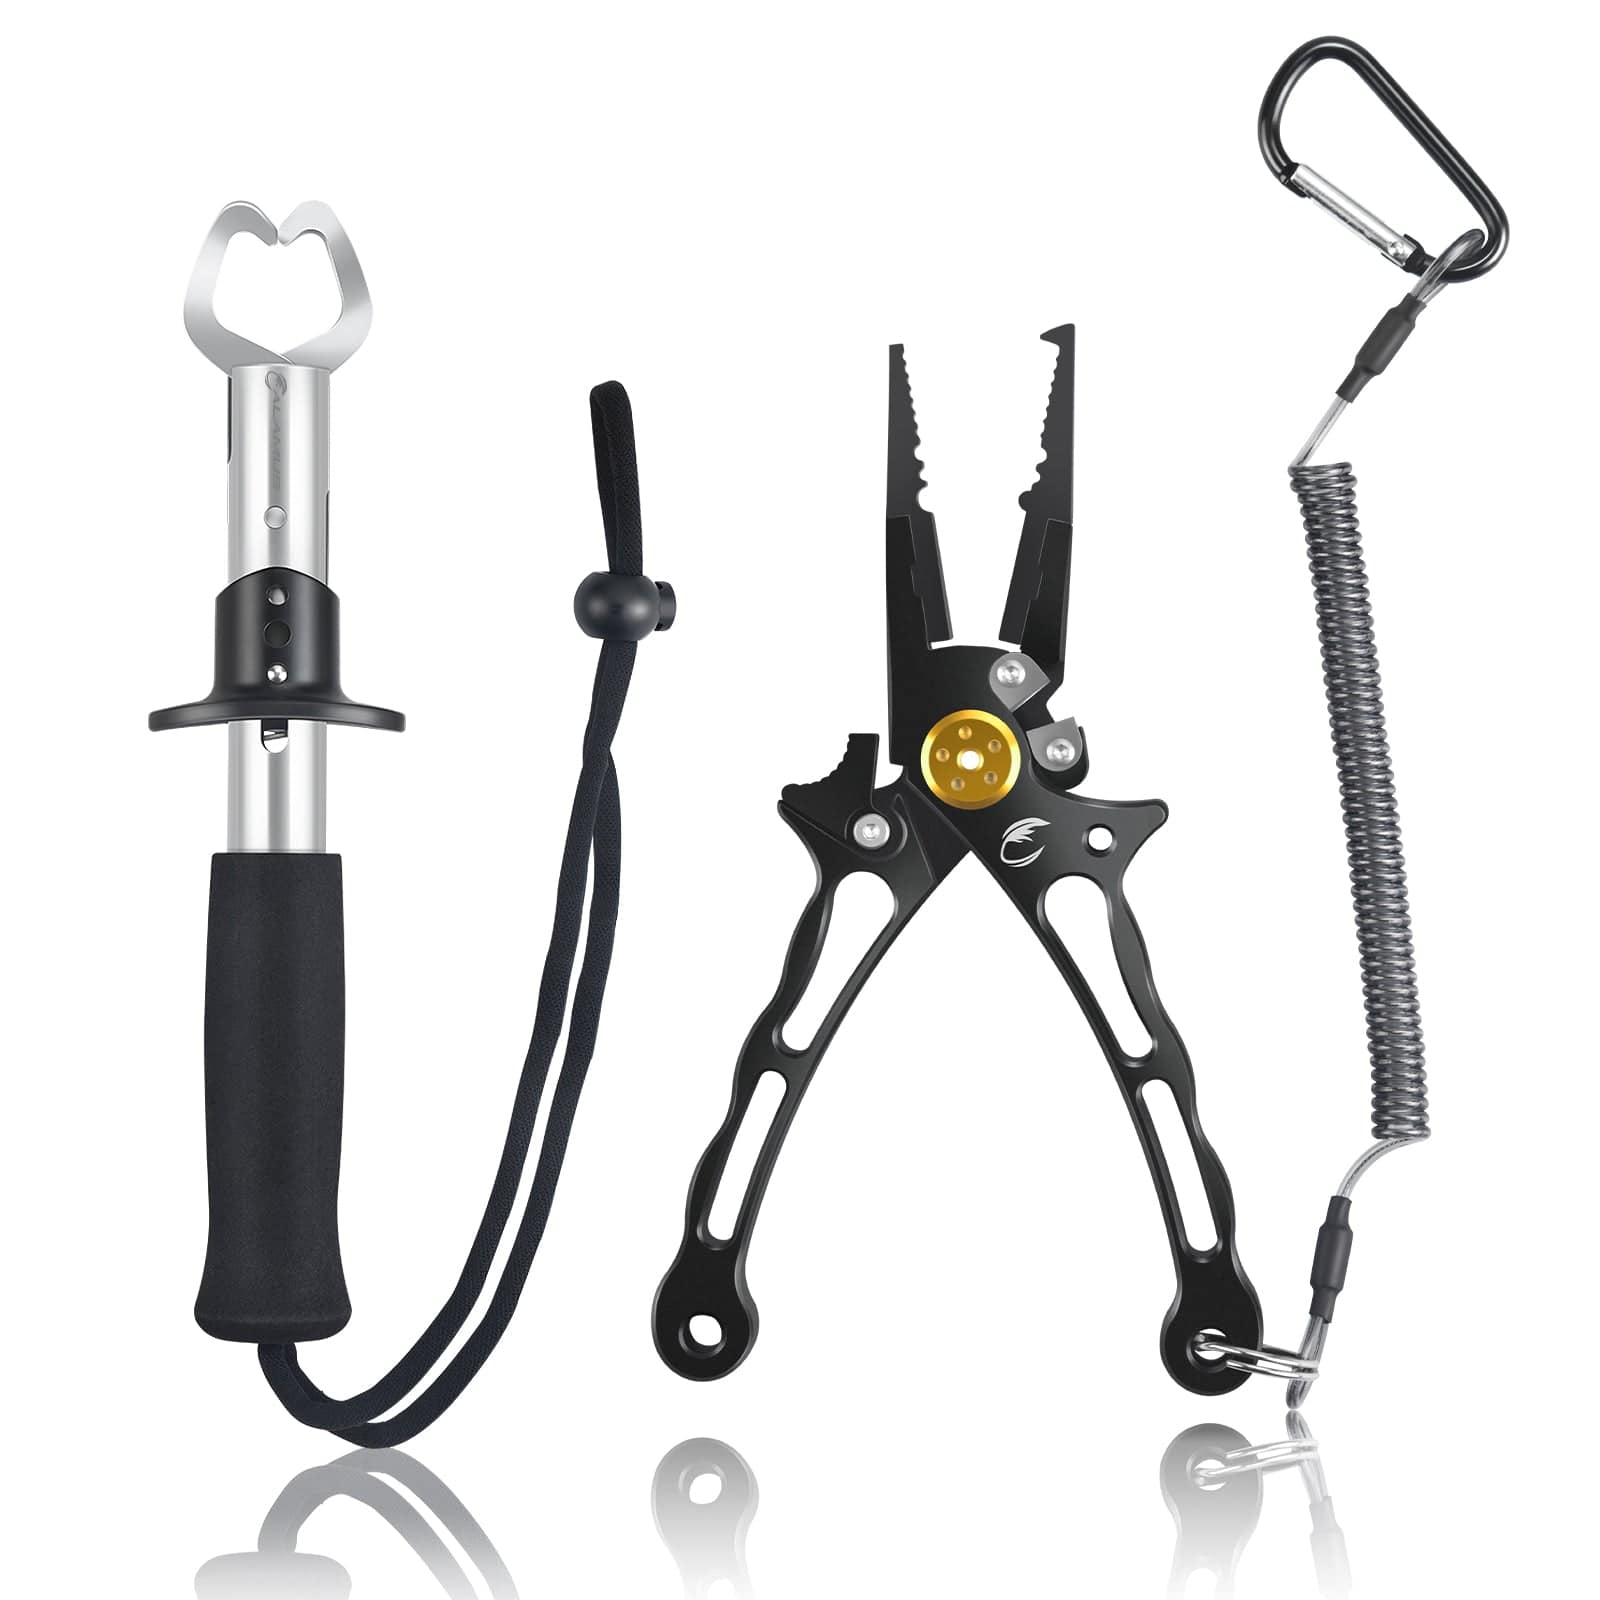 KastKing Fishing Plier and WideView Fishing Scale with Fish Lip